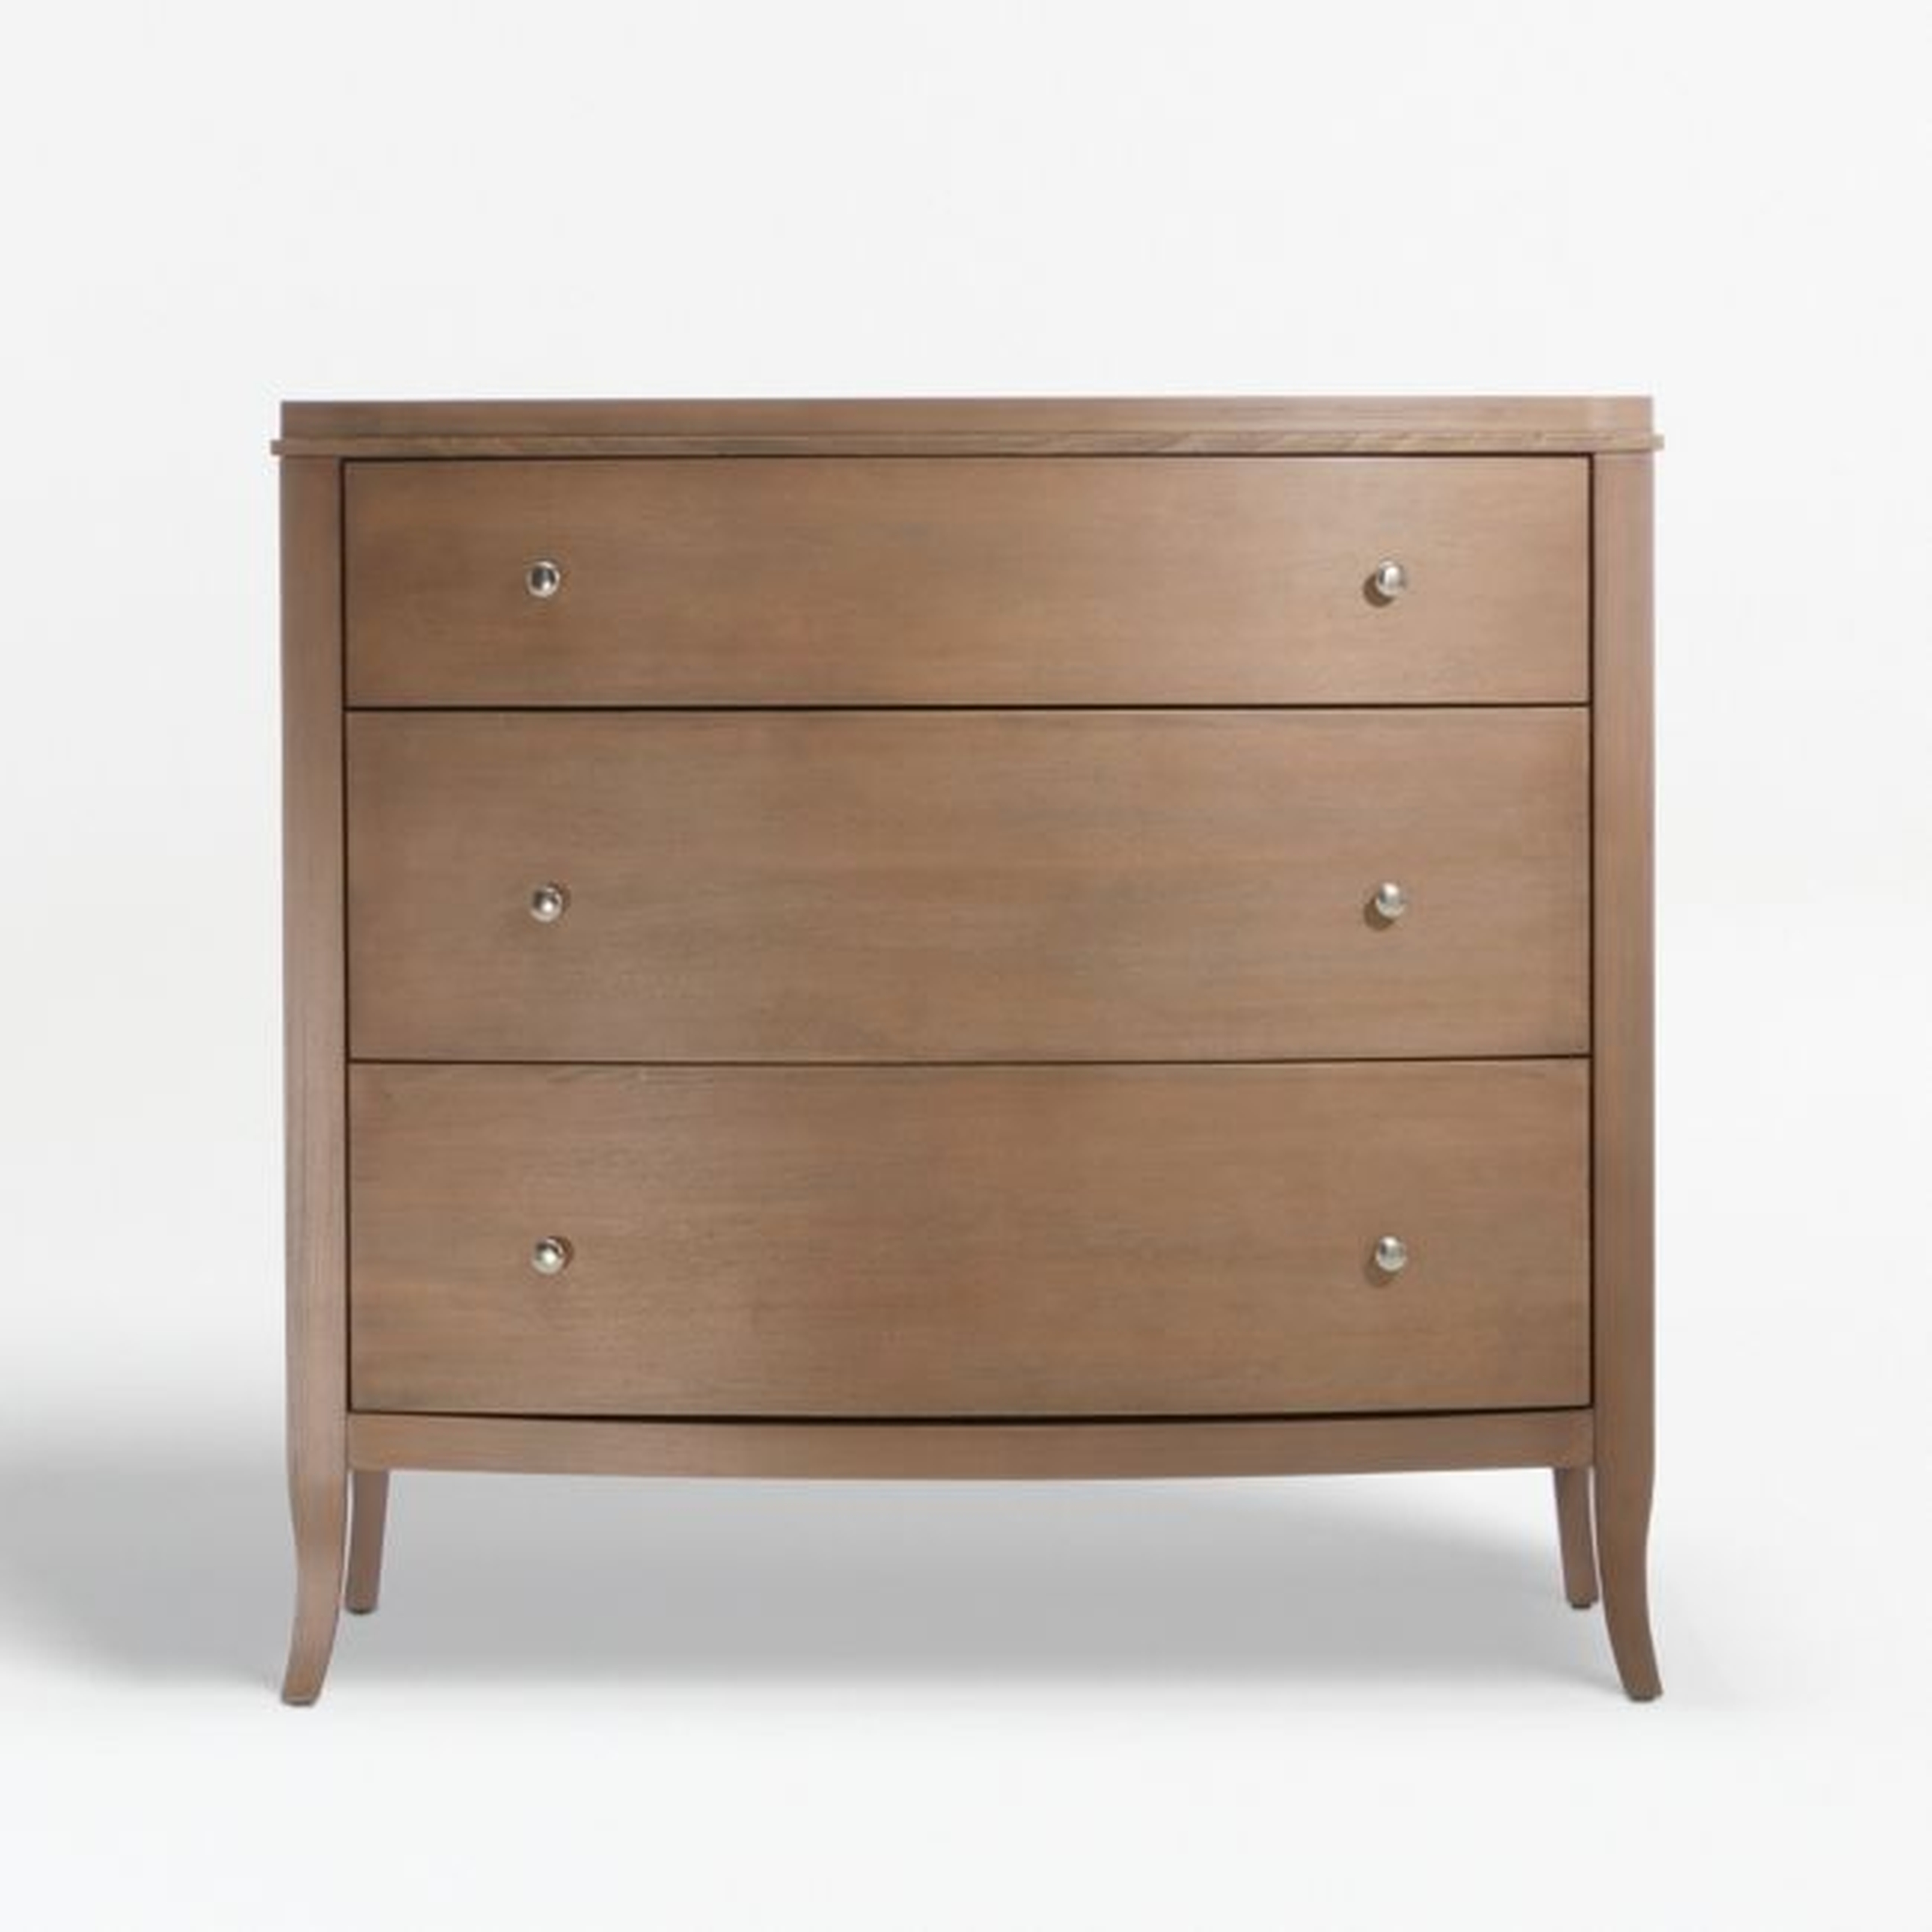 Colette Driftwood 3-Drawer Chest - Crate and Barrel